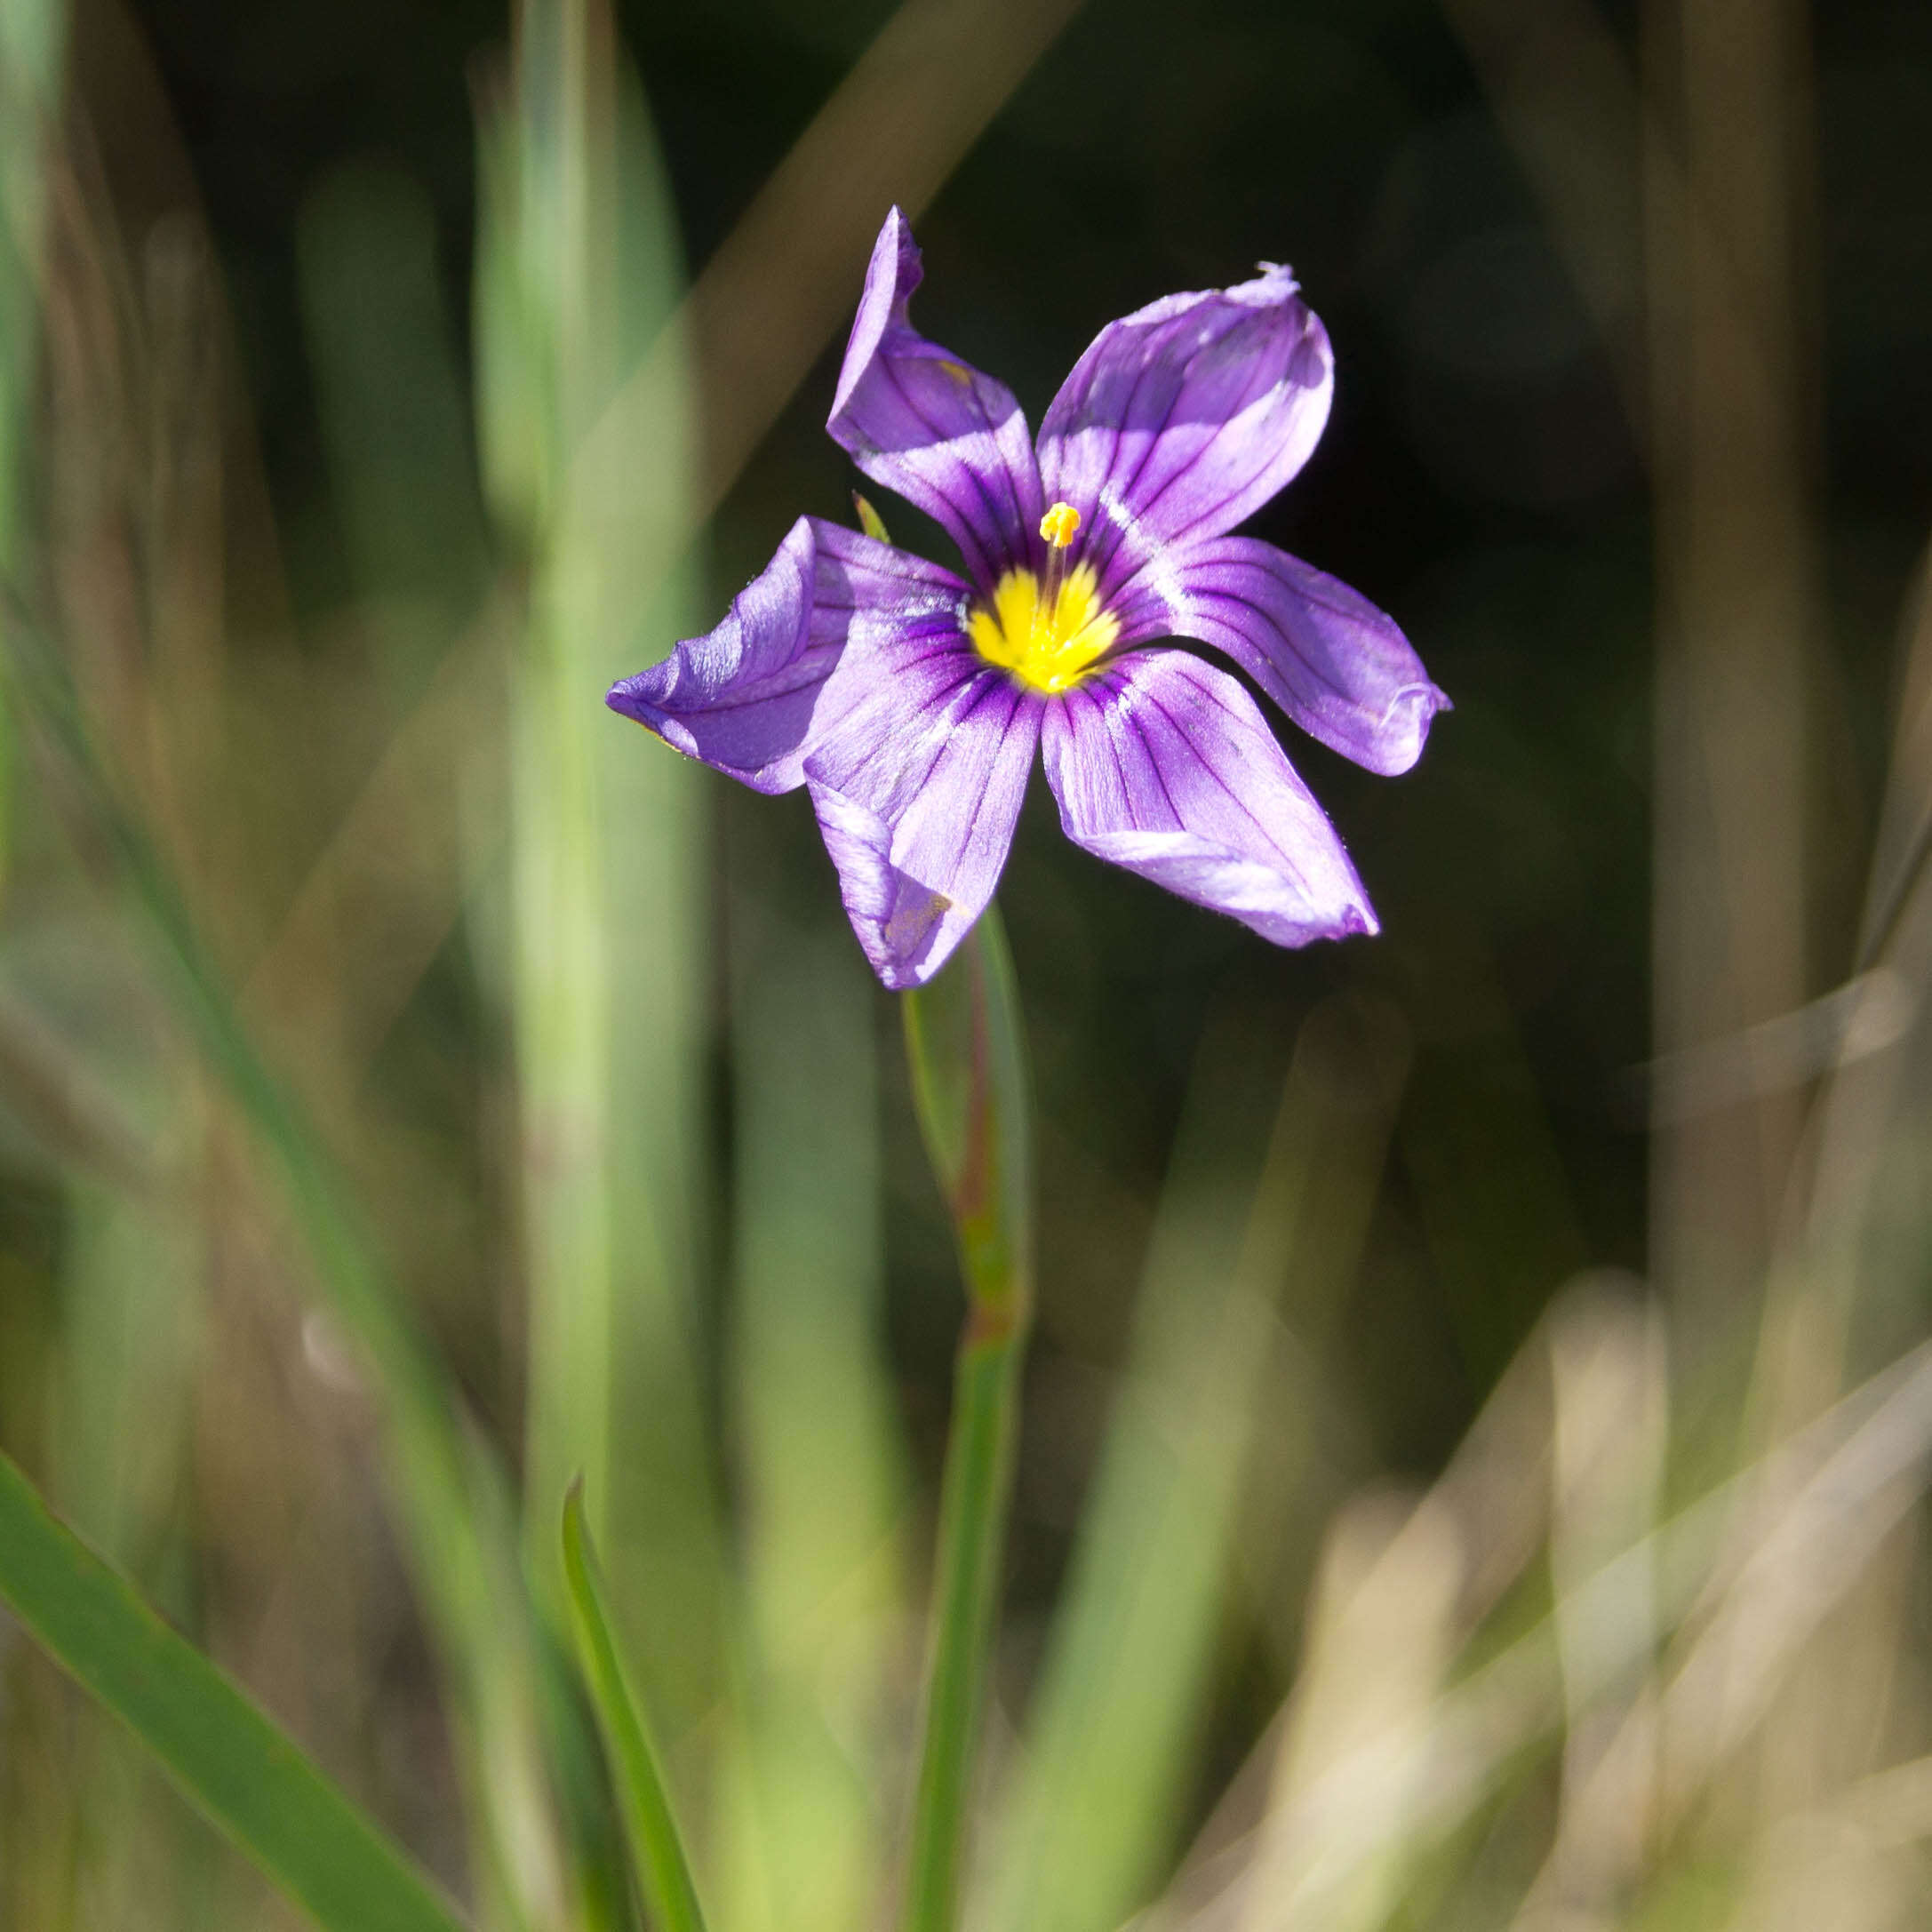 Image of Blue-eyed grass